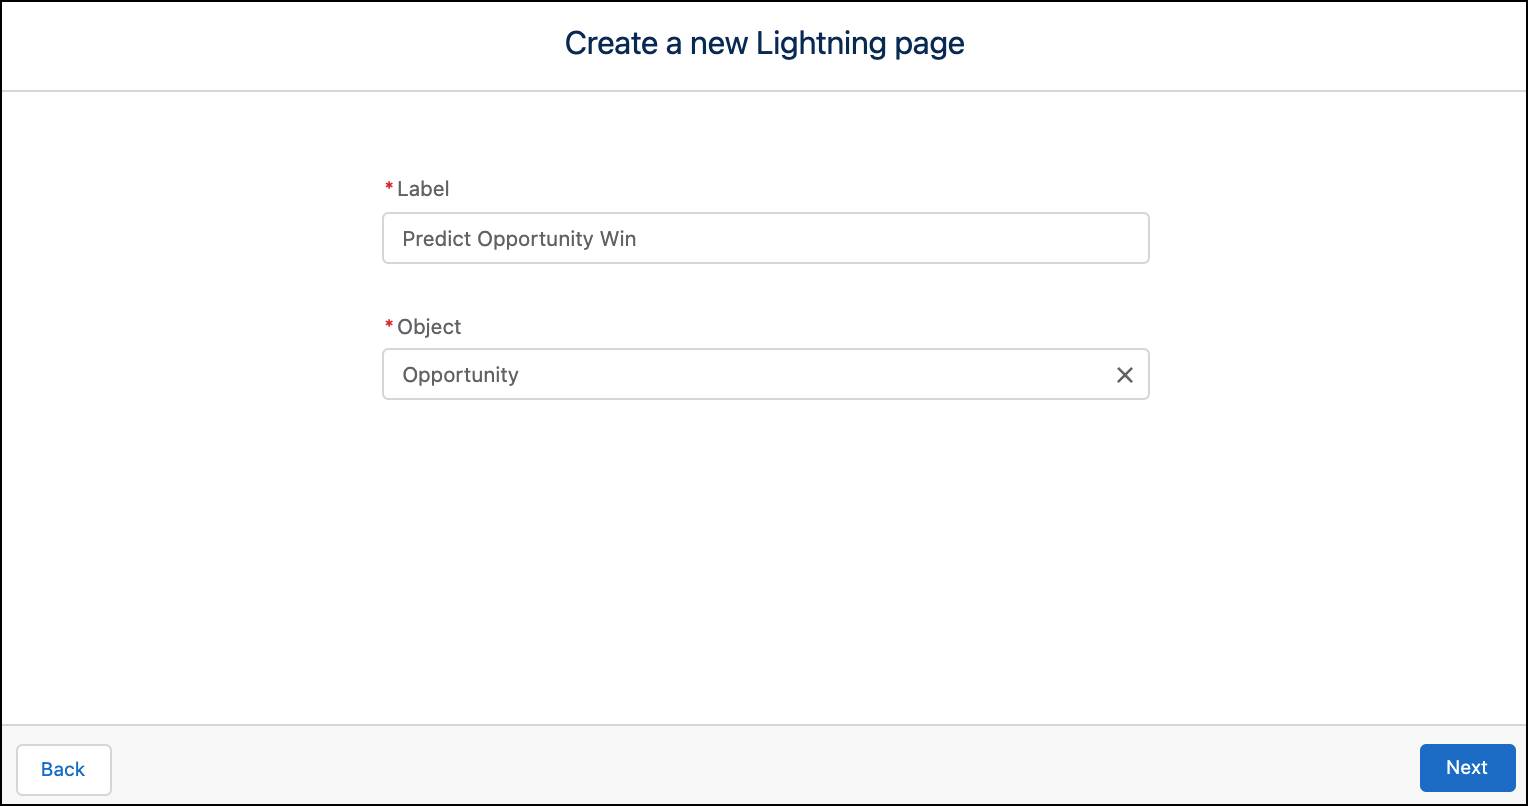 Create a new Lightning page screen with the Label and Object fields filled in